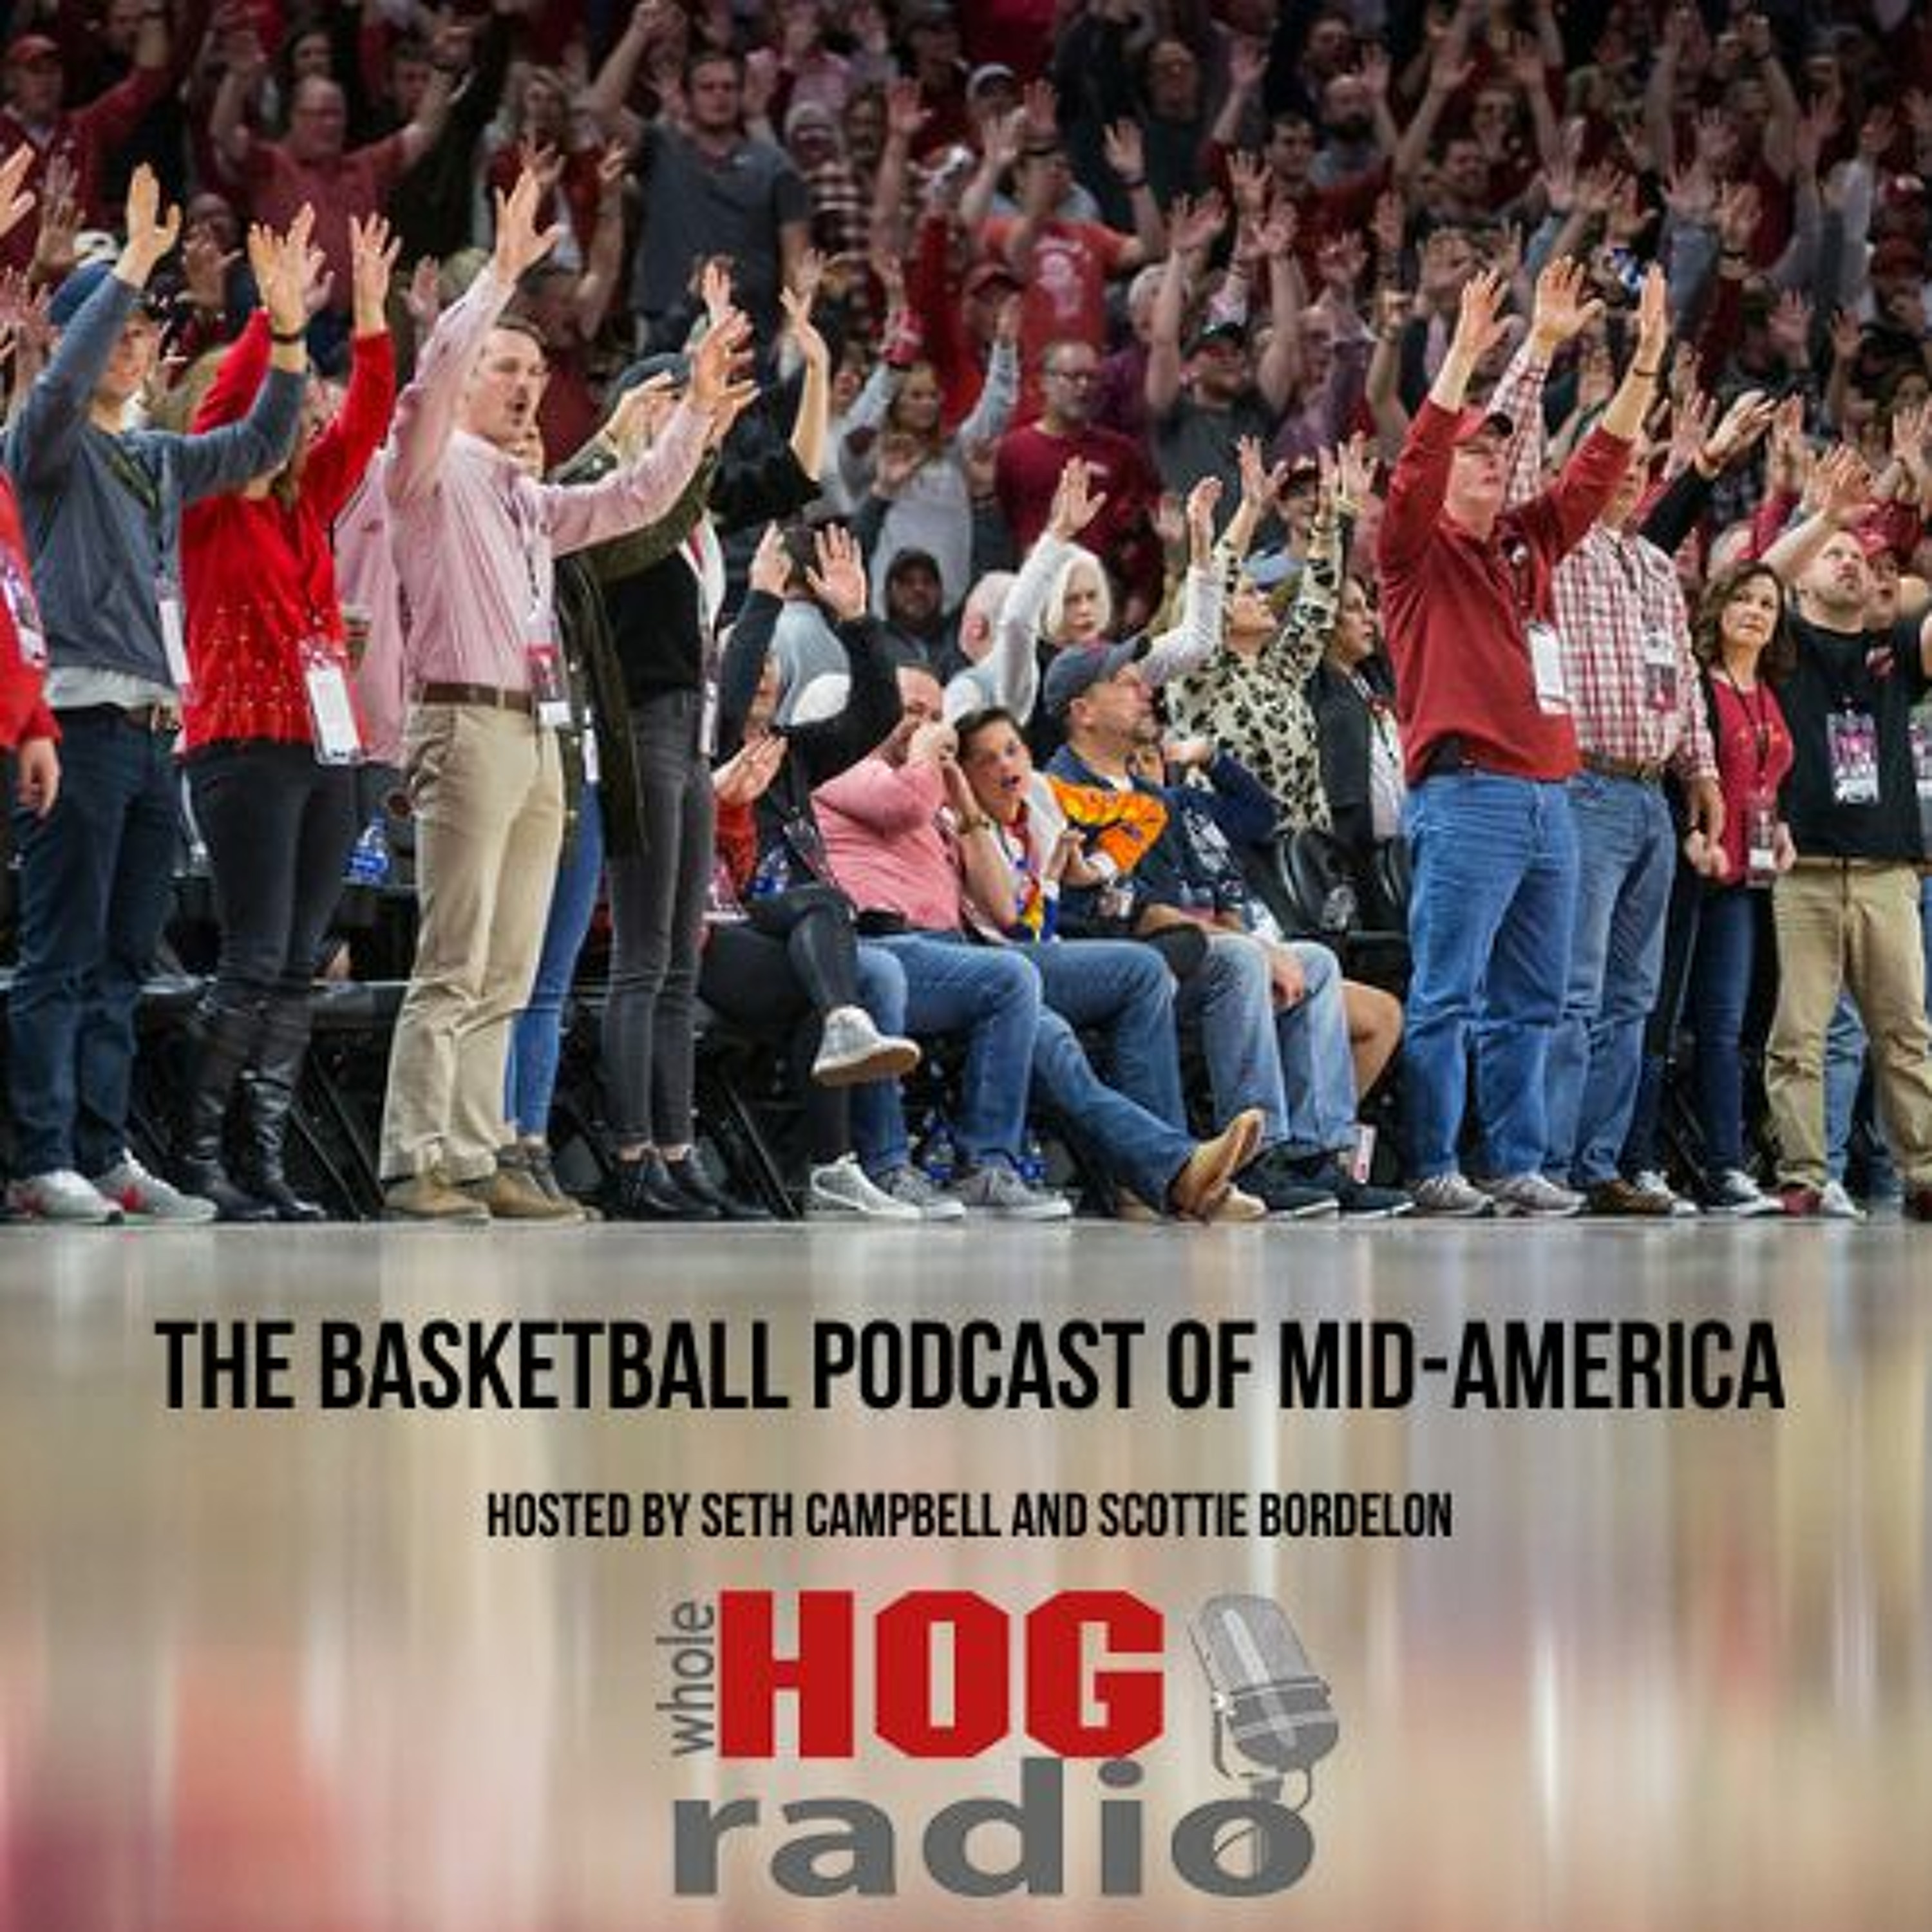 WHS Presents: The Basketball Podcast of Mid-America, Hogs lose despite Jones' 40